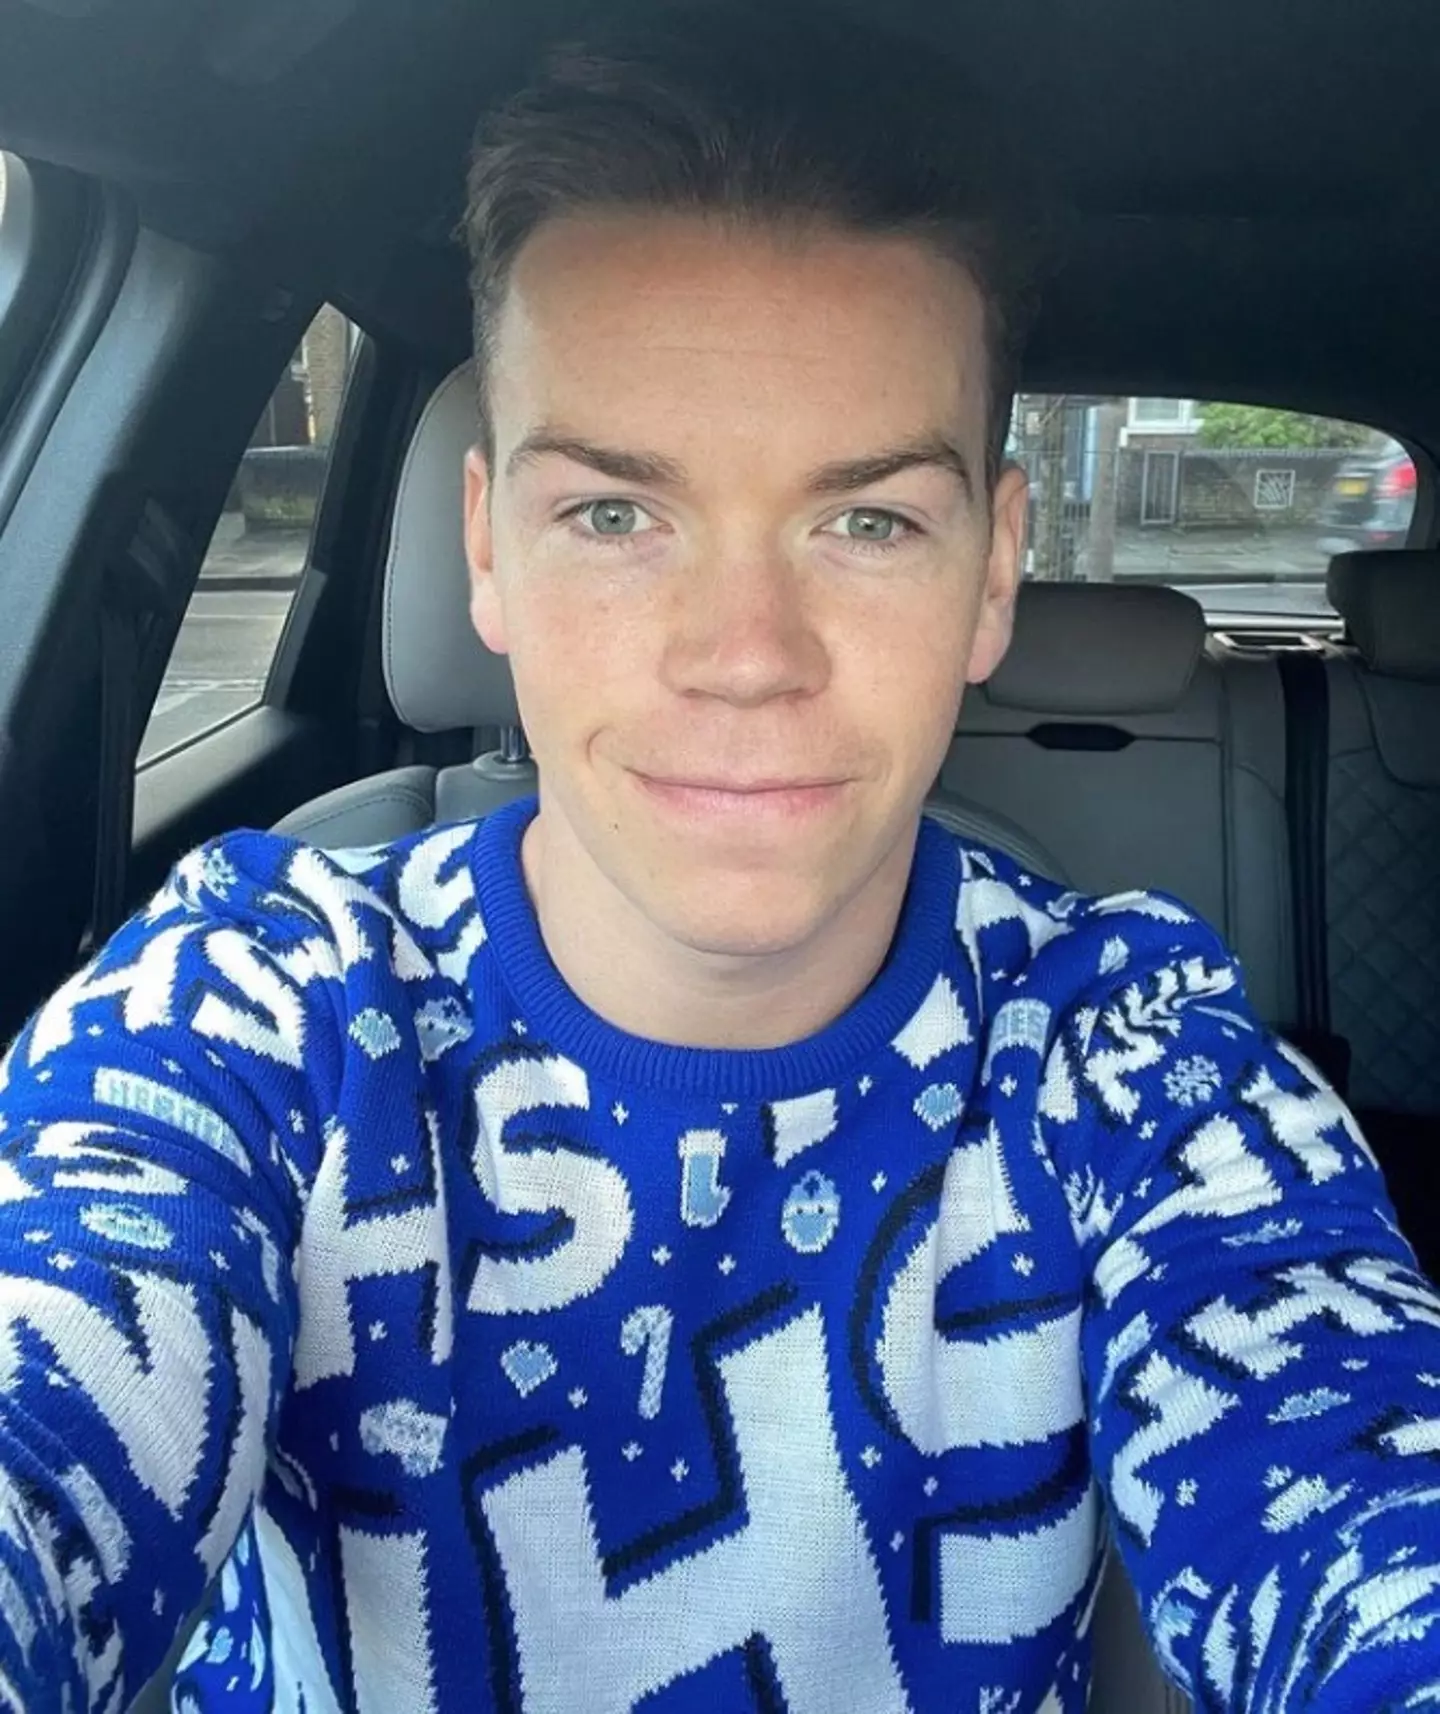 Will Poulter has hit back at the horrible trolls who say he 'looks unusual'.